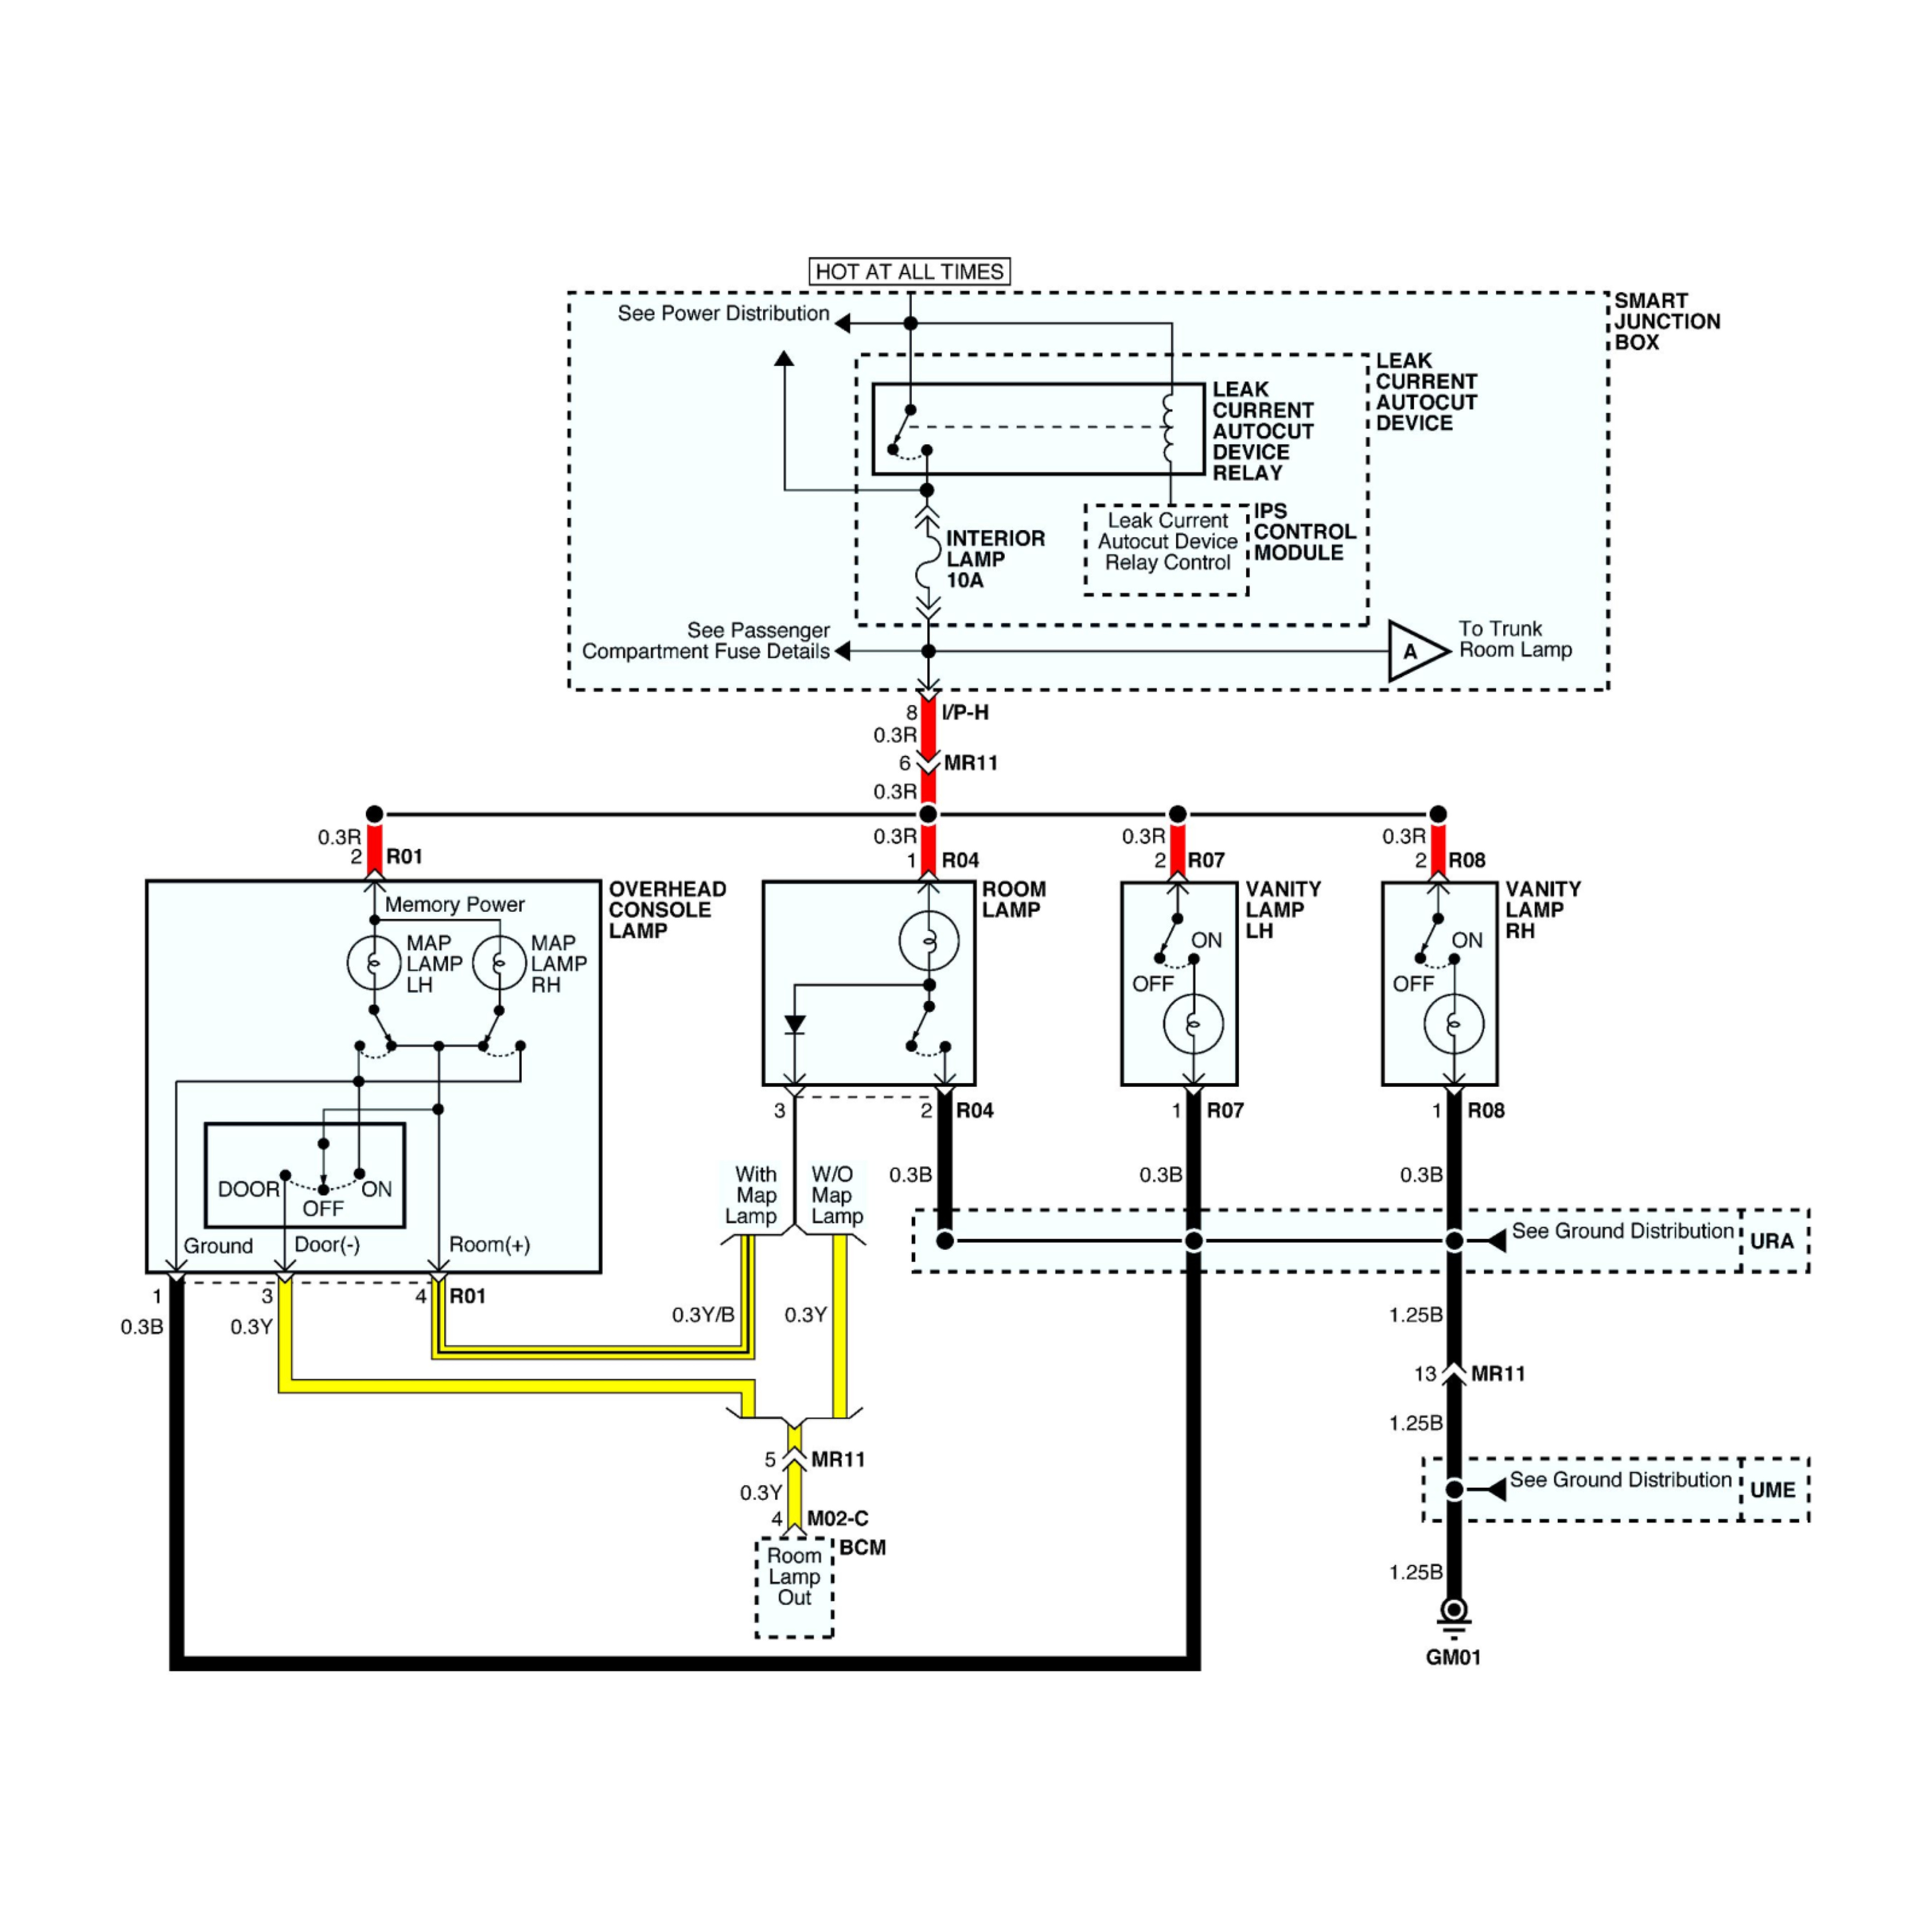 2015 Mercedes-Benz G550 wiring diagrams example